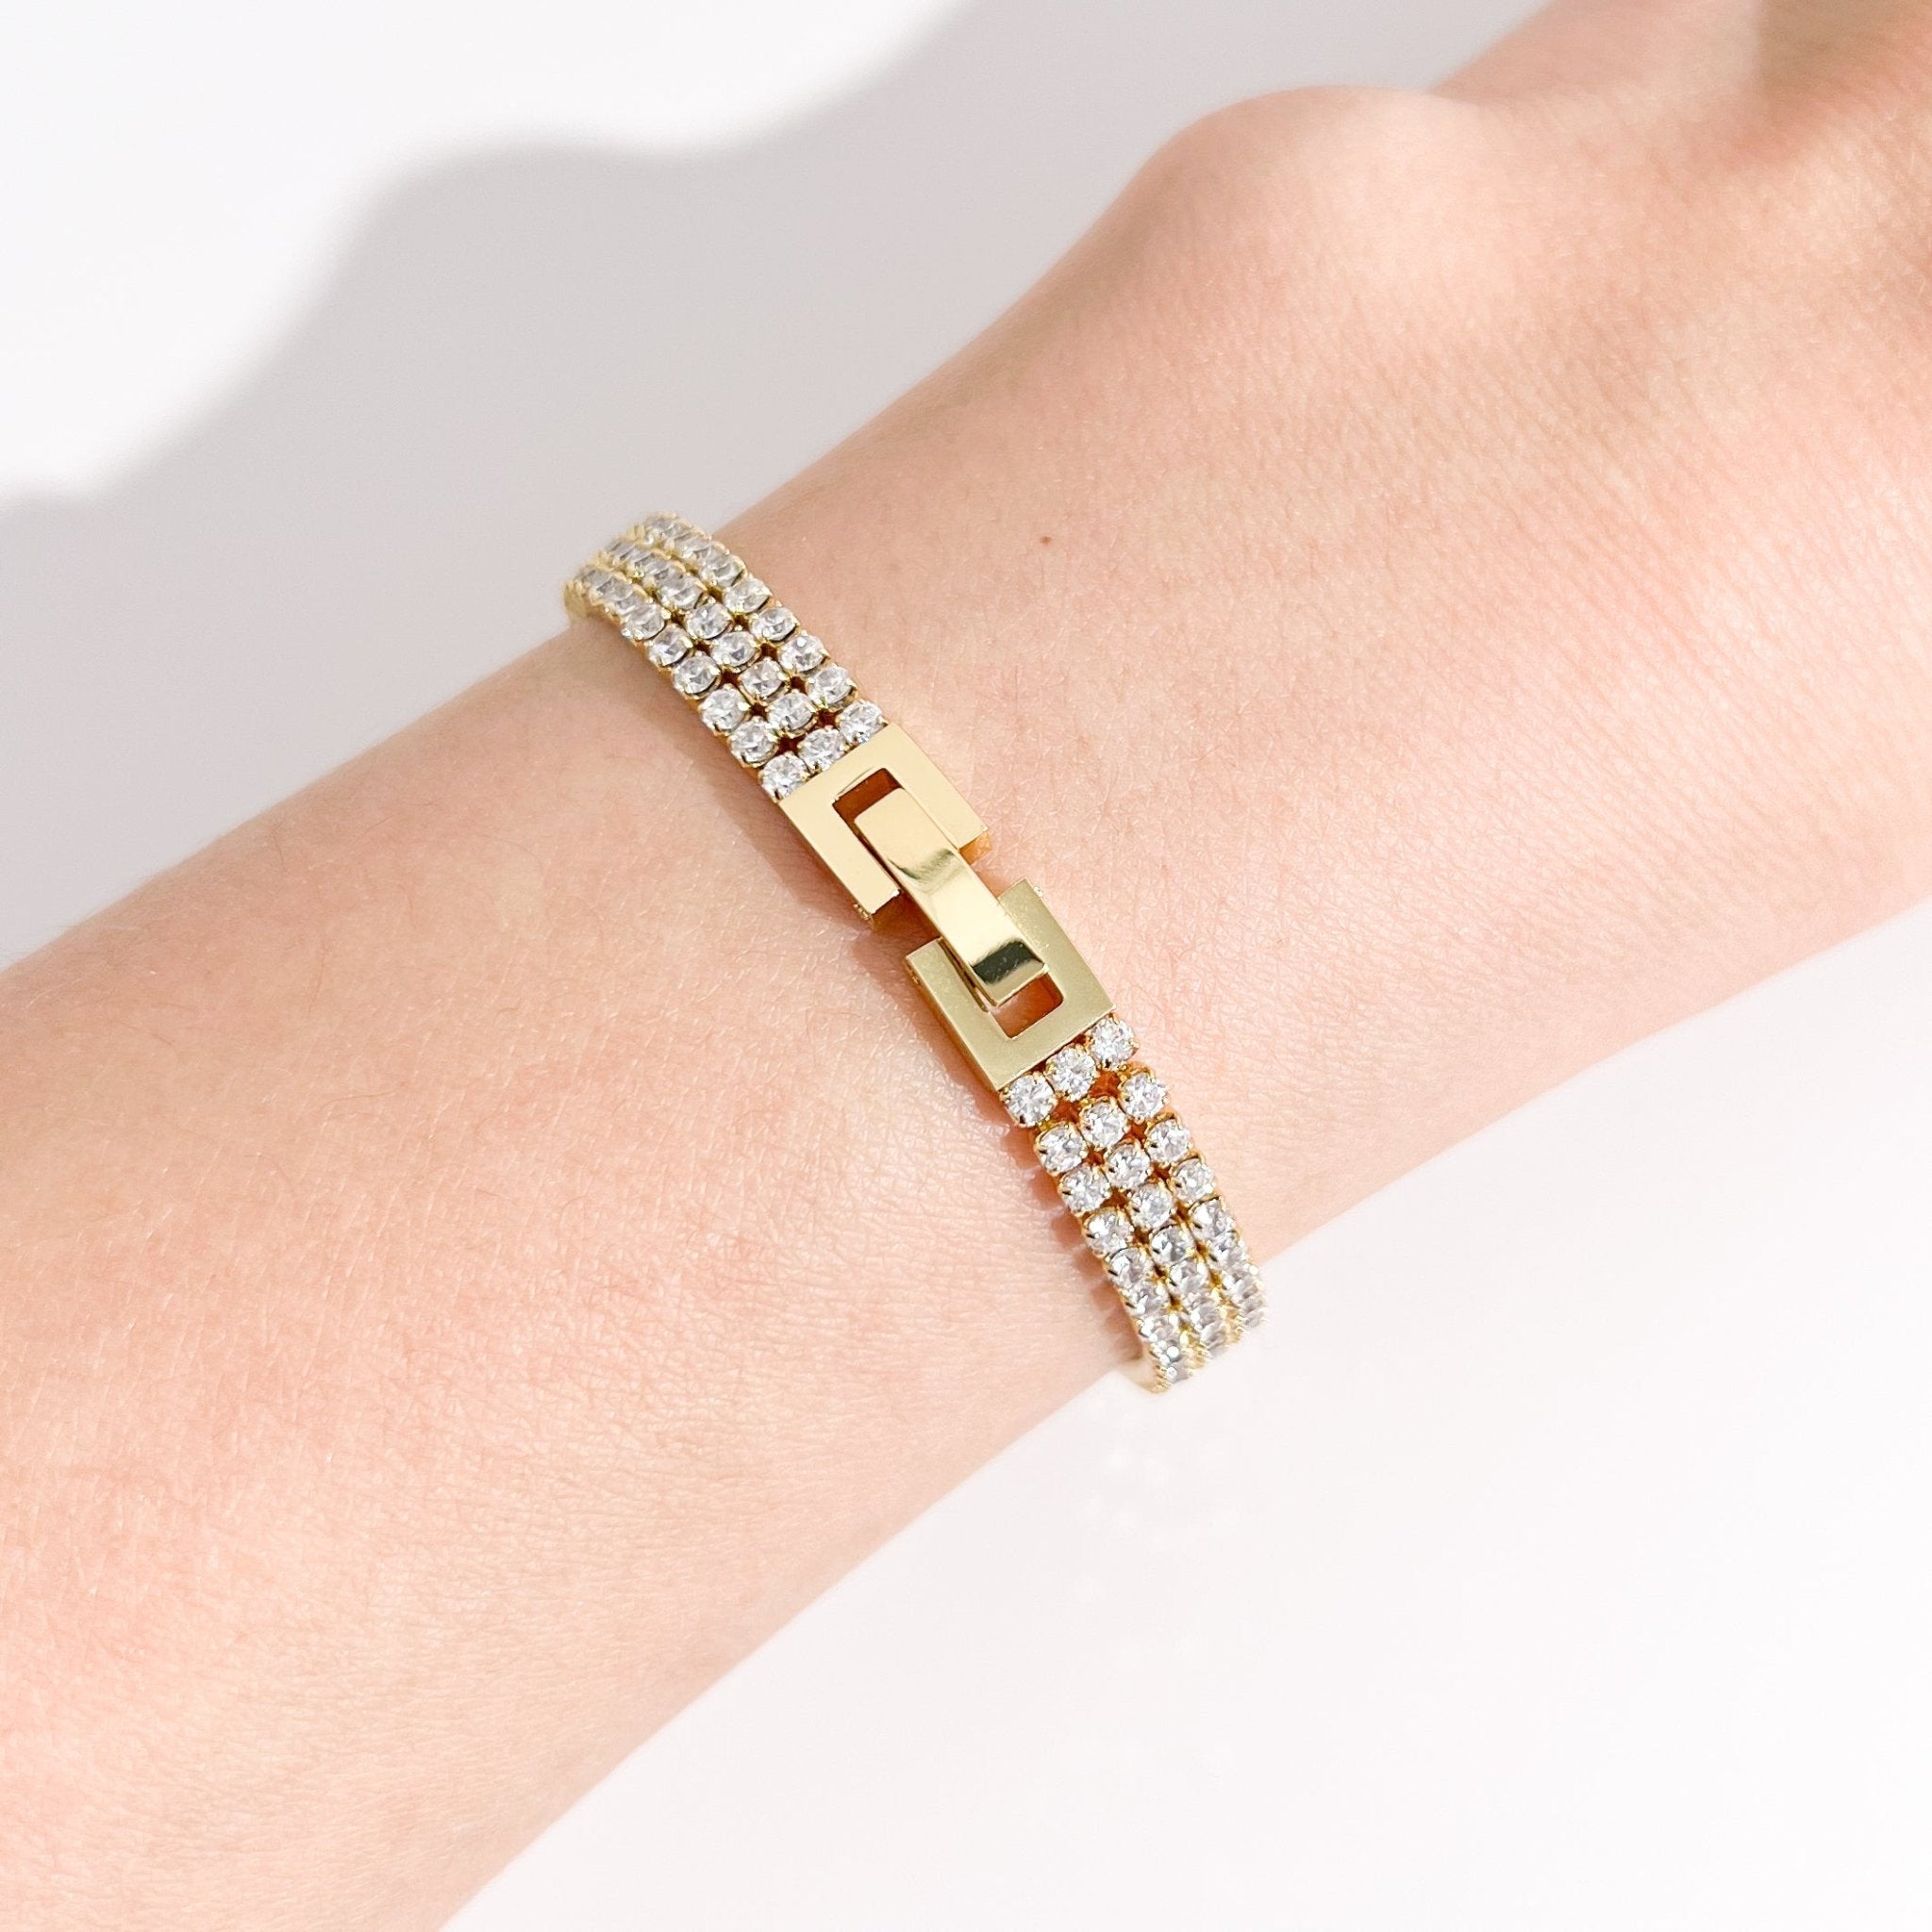 Pave Gems Bracelet in Gold - Flaire & Co.